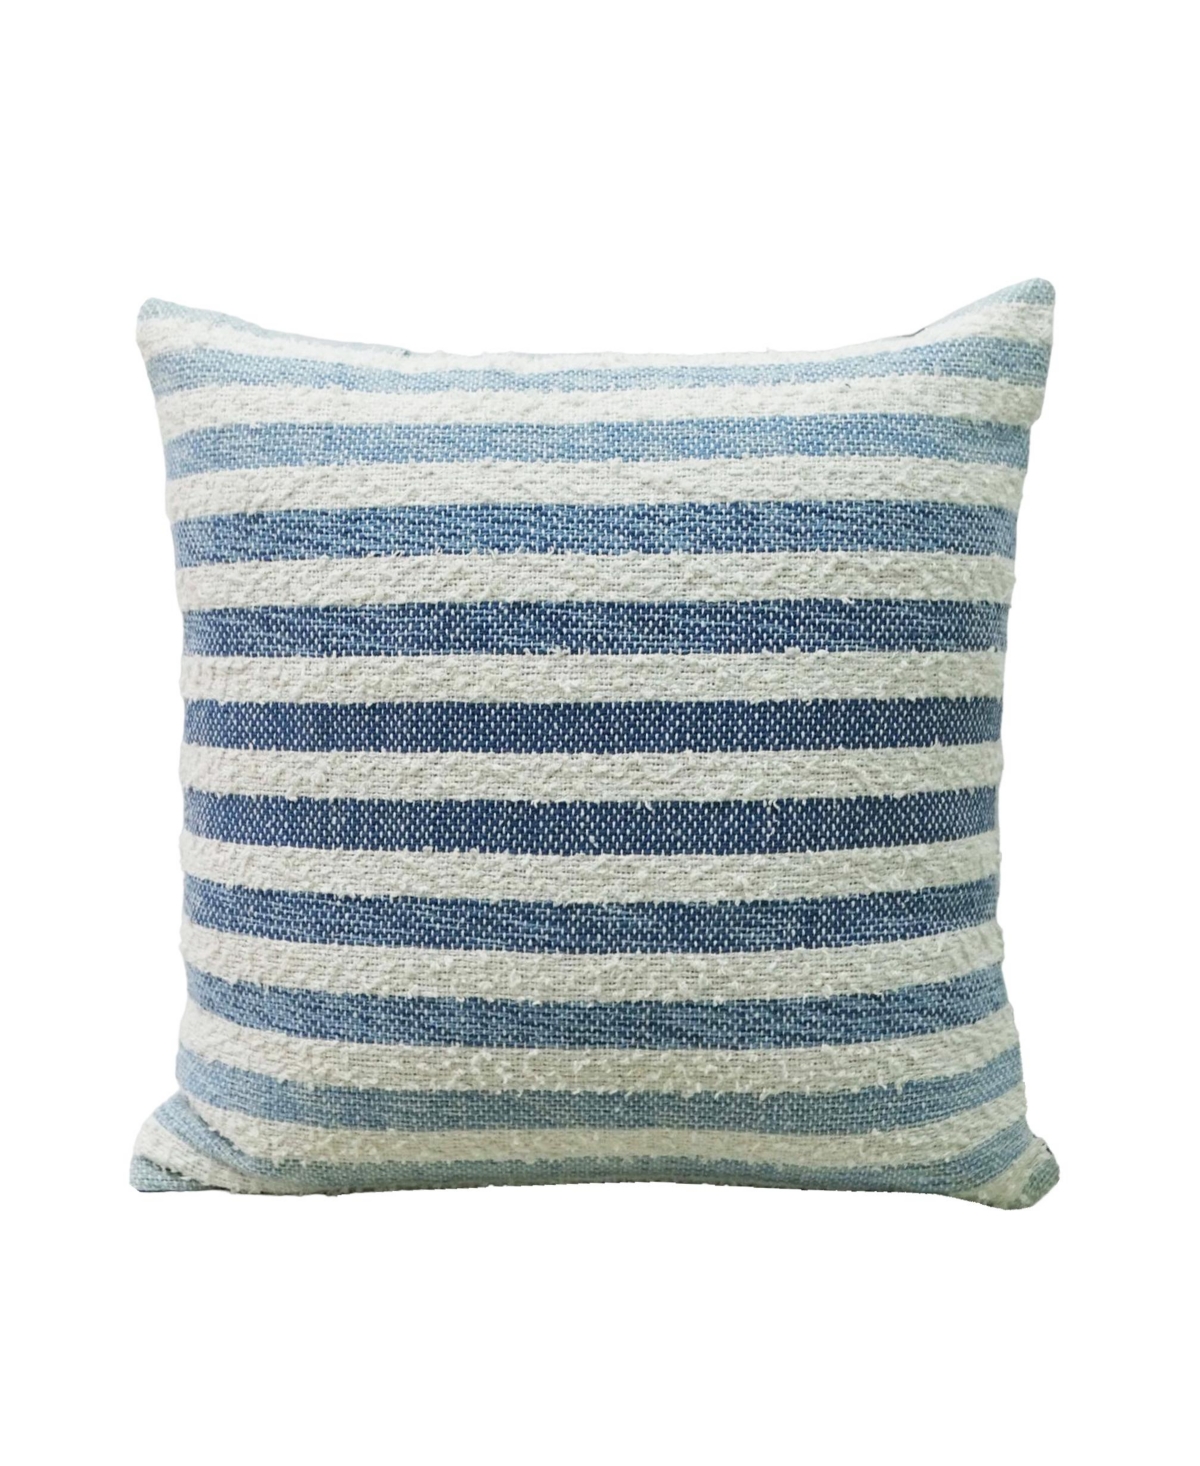 Vibhsa Linden Street 100% Cotton Ombre Textured Stripe Decorative Pillow, 20" X 20" In Multi Color